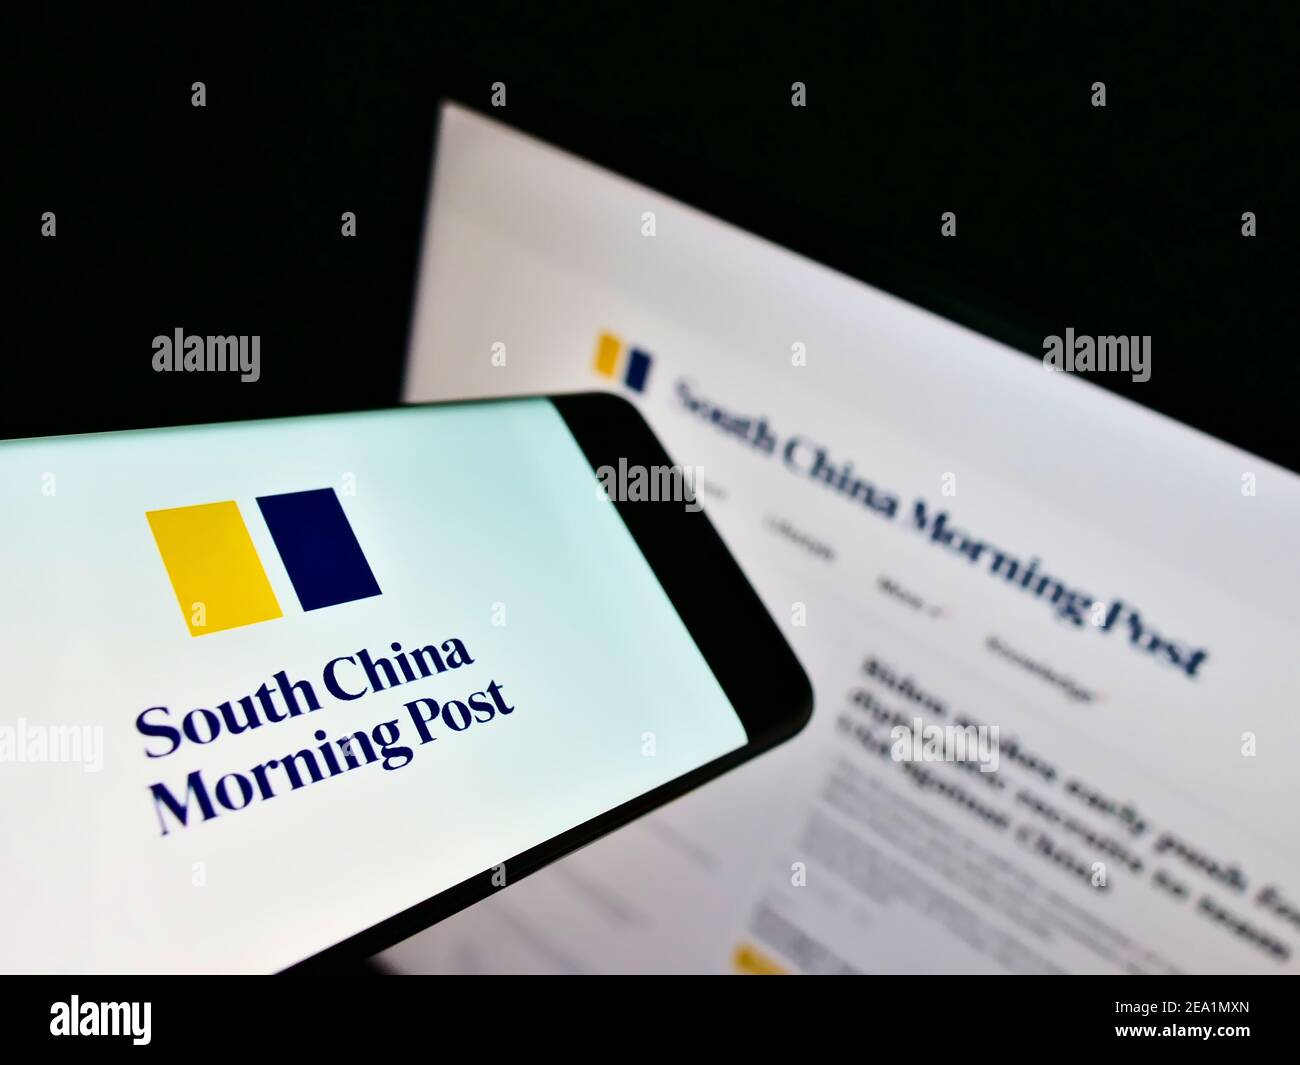 Mobile phone with logo of newspaper South China Morning Post (Hongkong) on screen in front of company website. Focus on center-right of phone display. Stock Photo